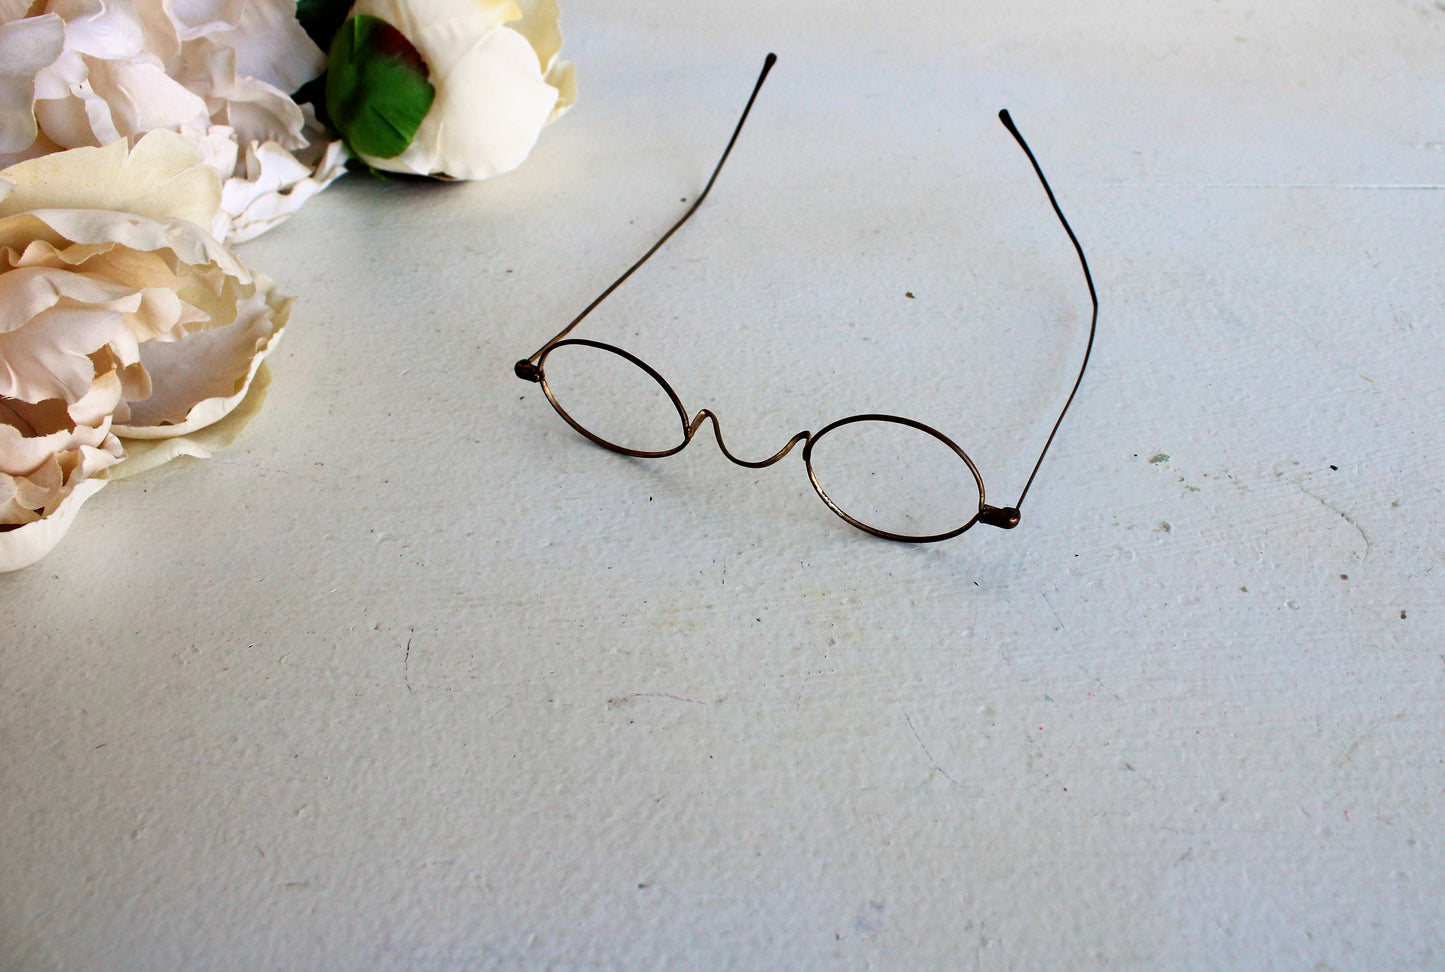 Antique Victorian Wire Spectacle Frames